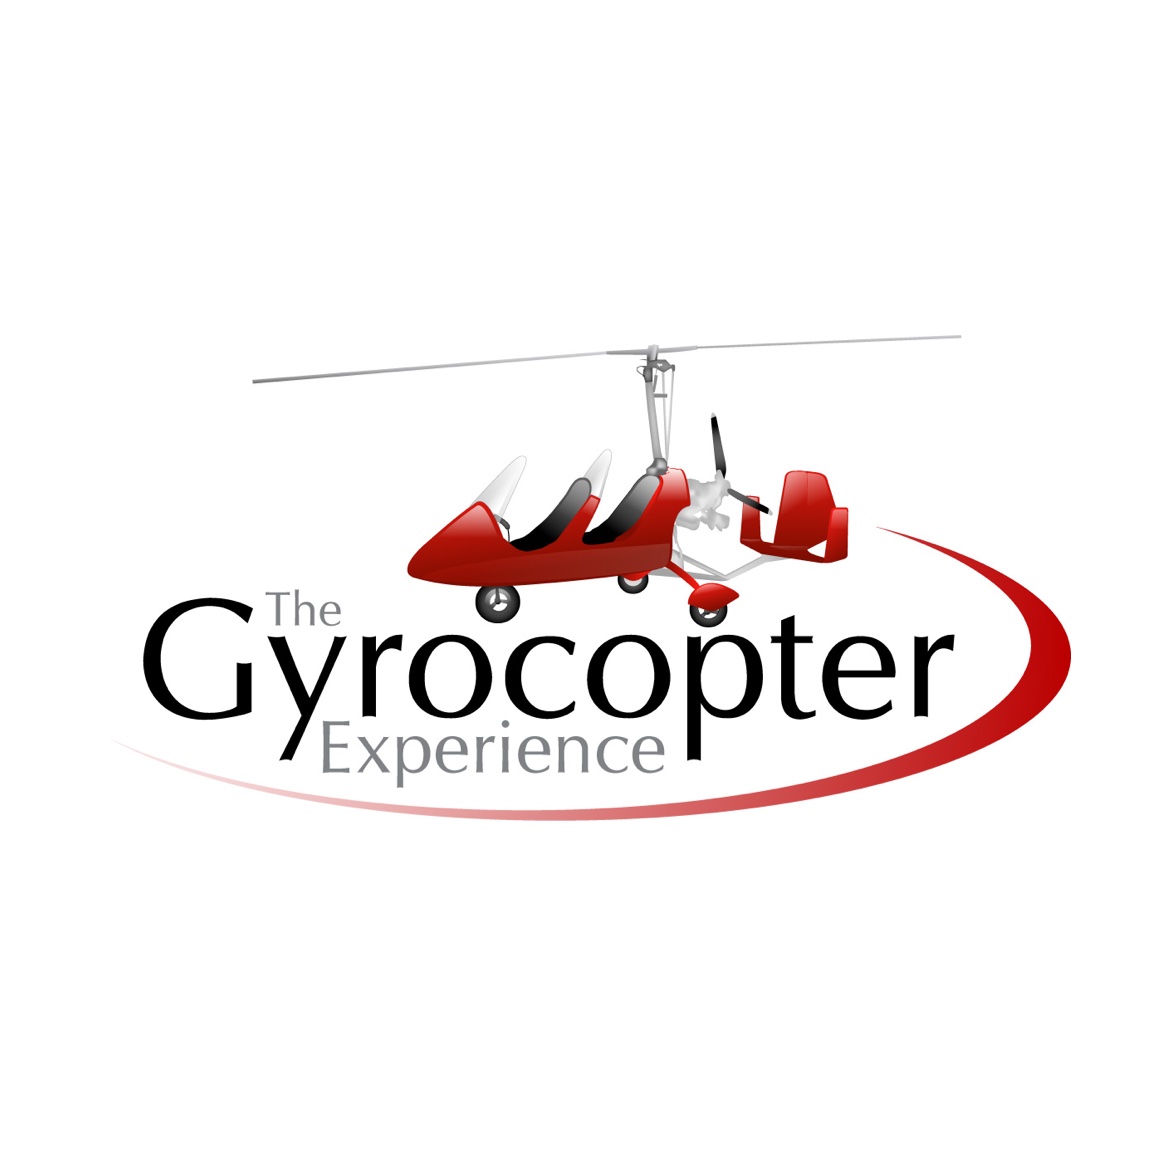 The Gyrocopter Experience - London East